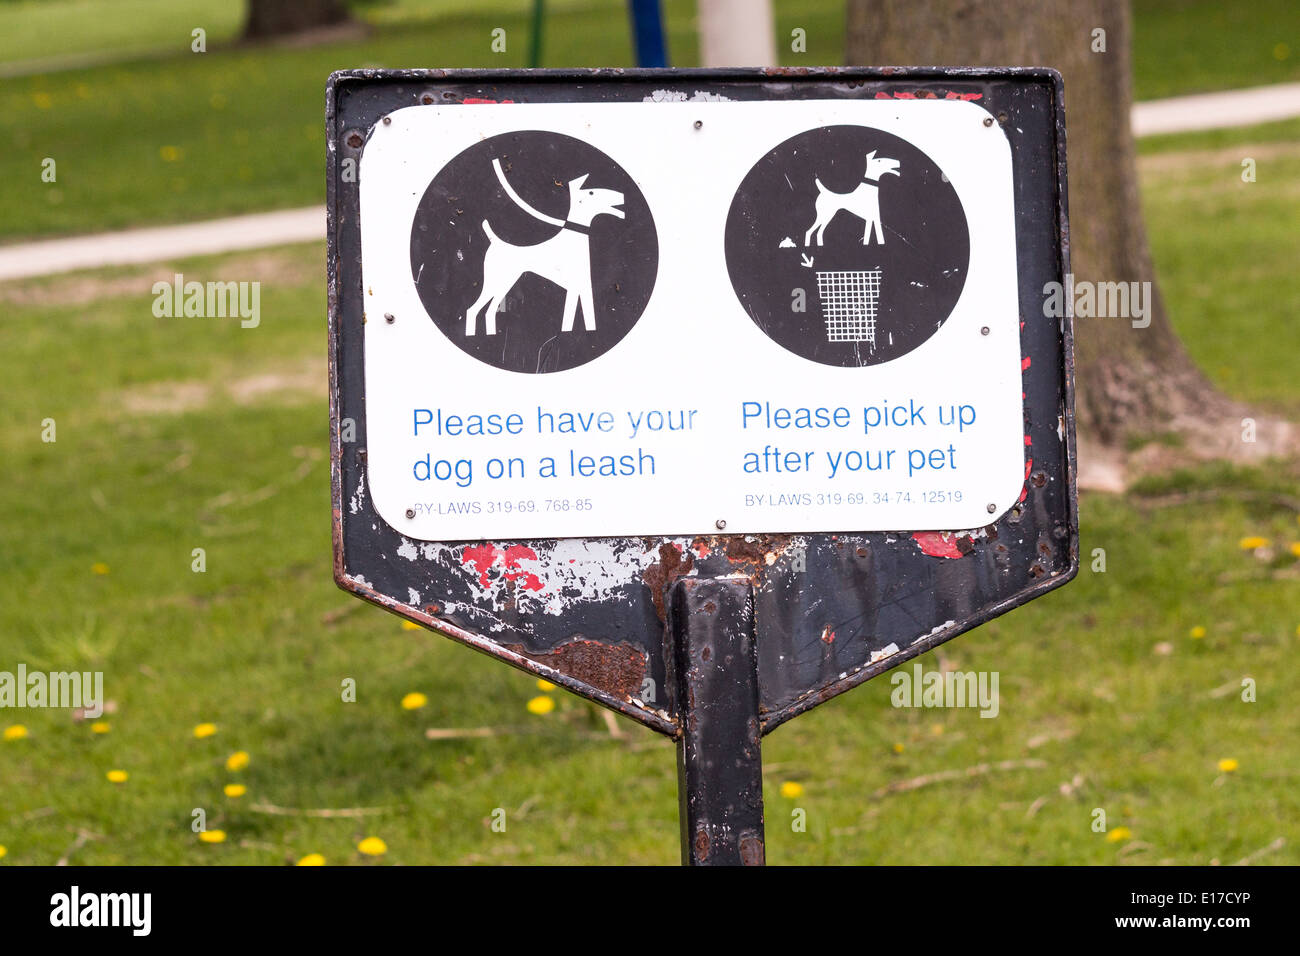 Sign for dog owners to keep dog on lease and to scoop and pick up after their dog. Stock Photo